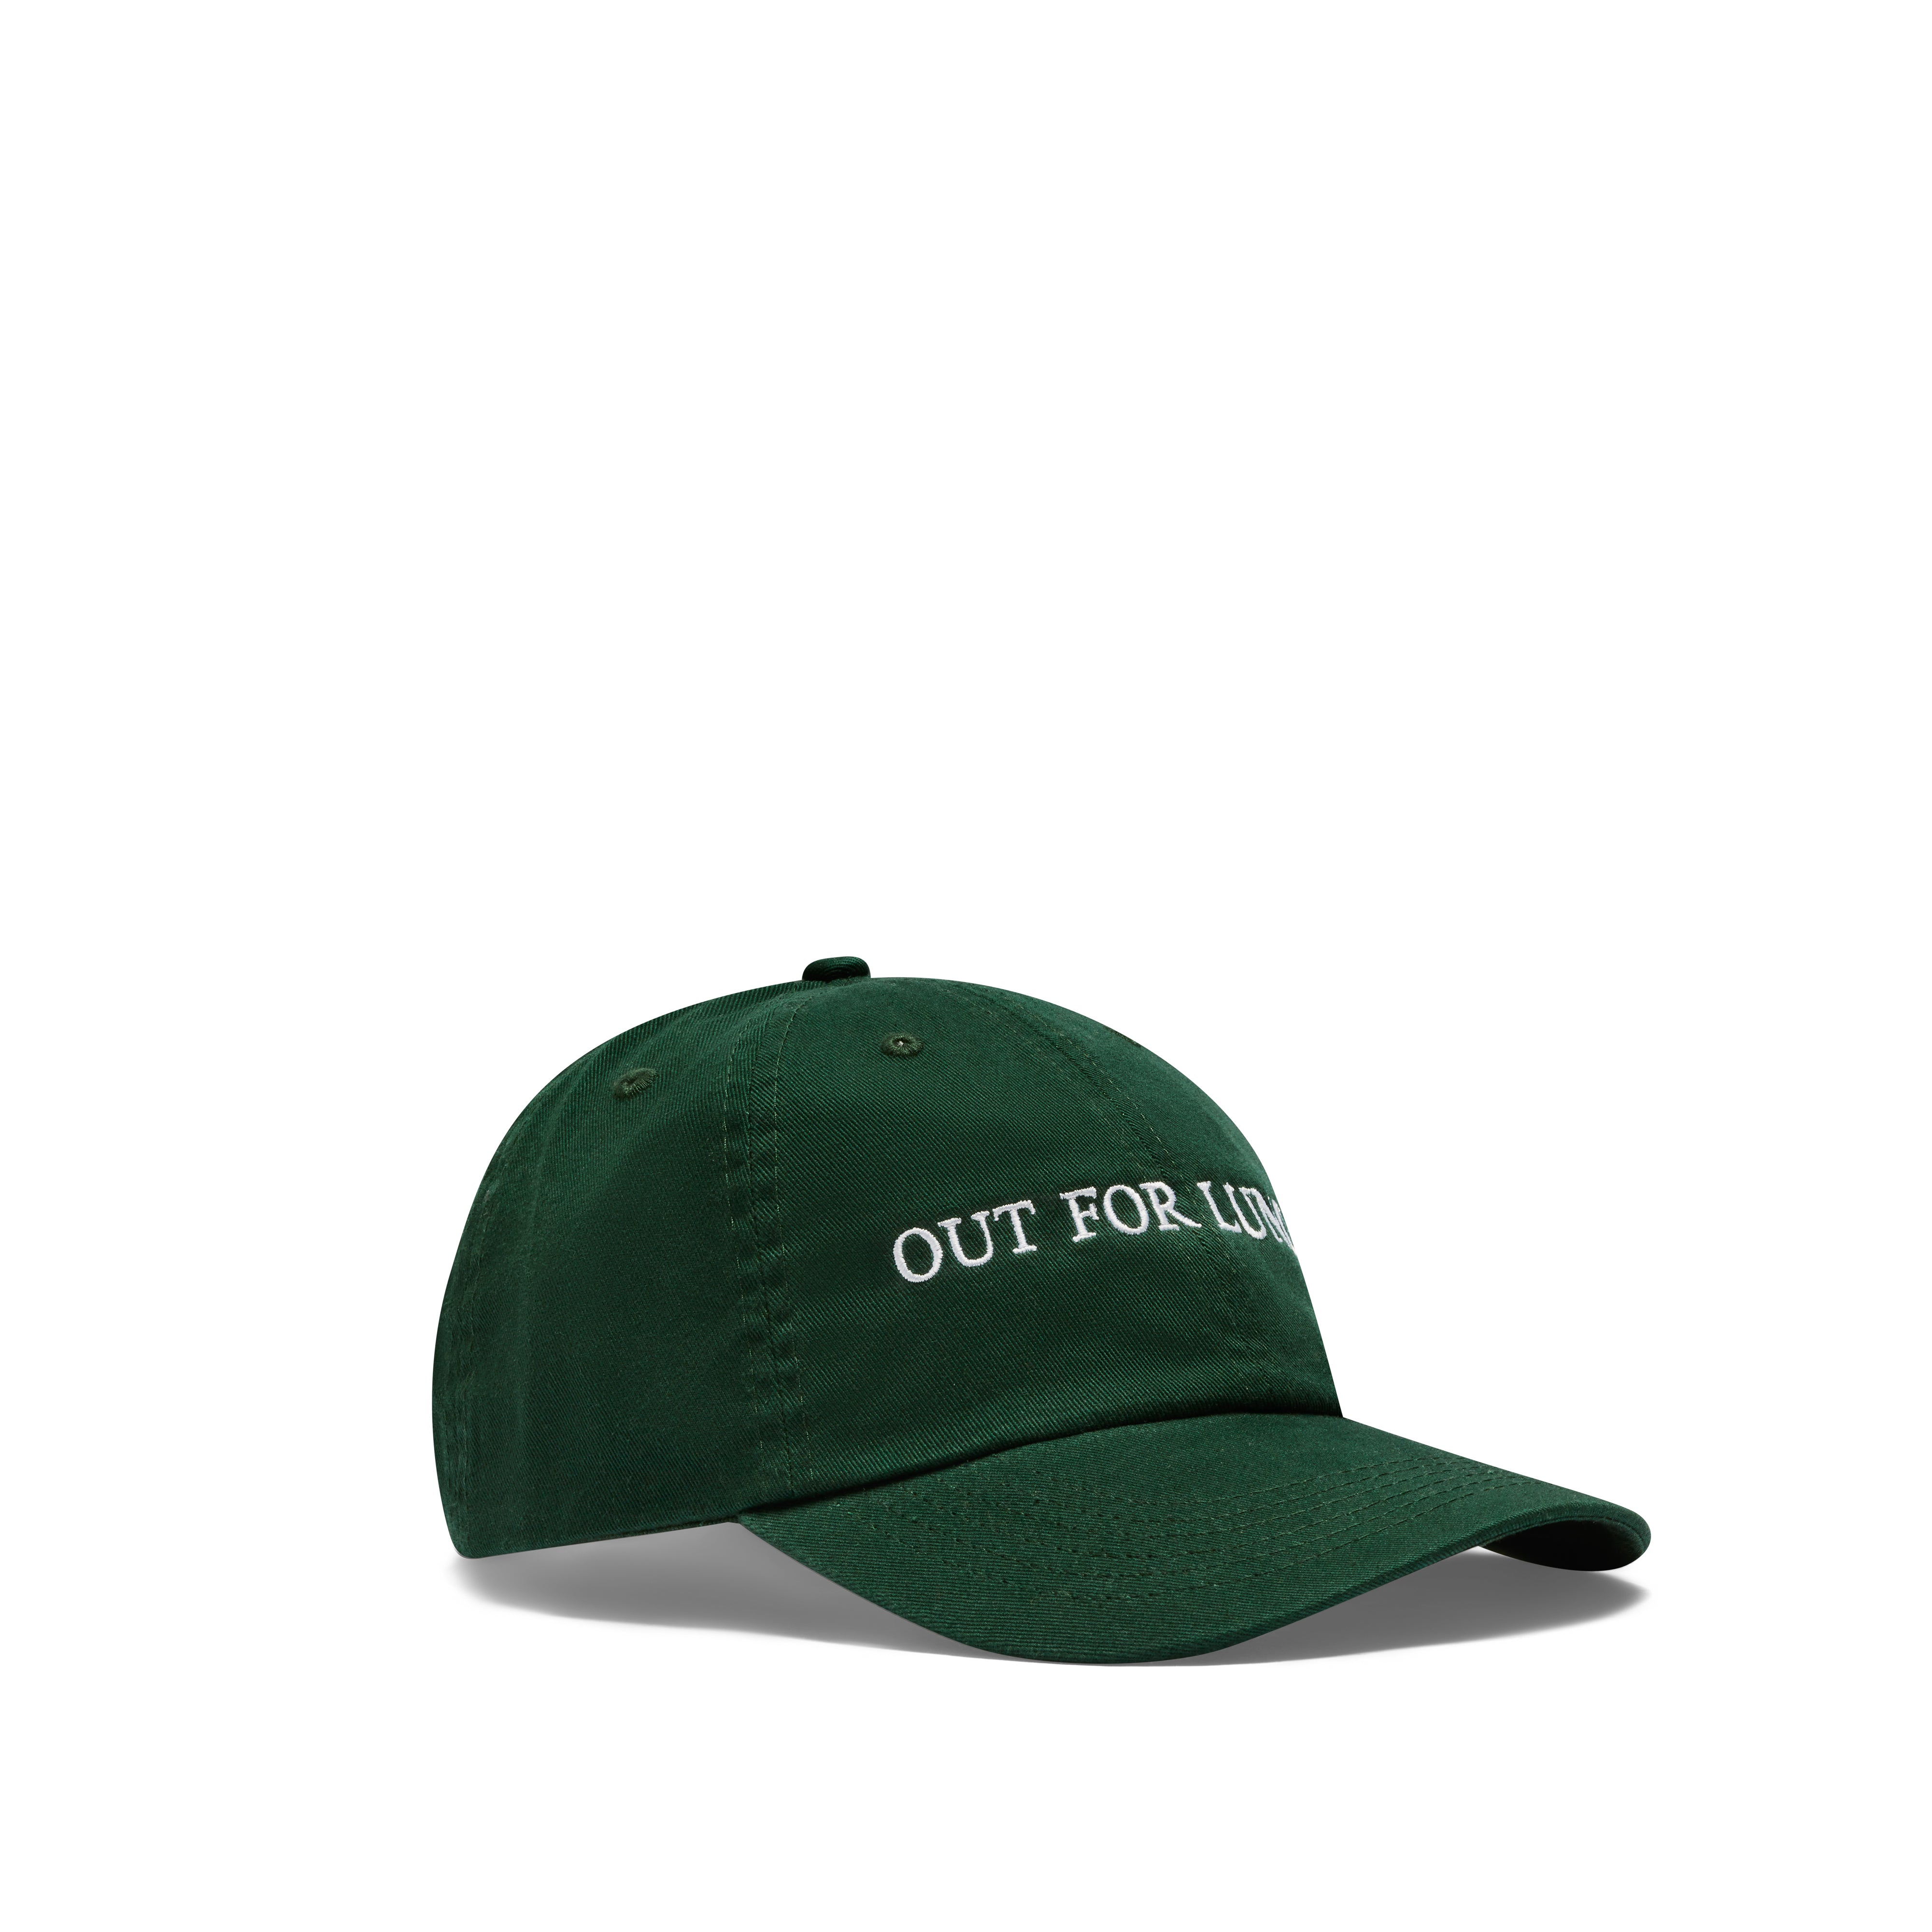 Idea Books - Out For Lunch Hat - (Green)